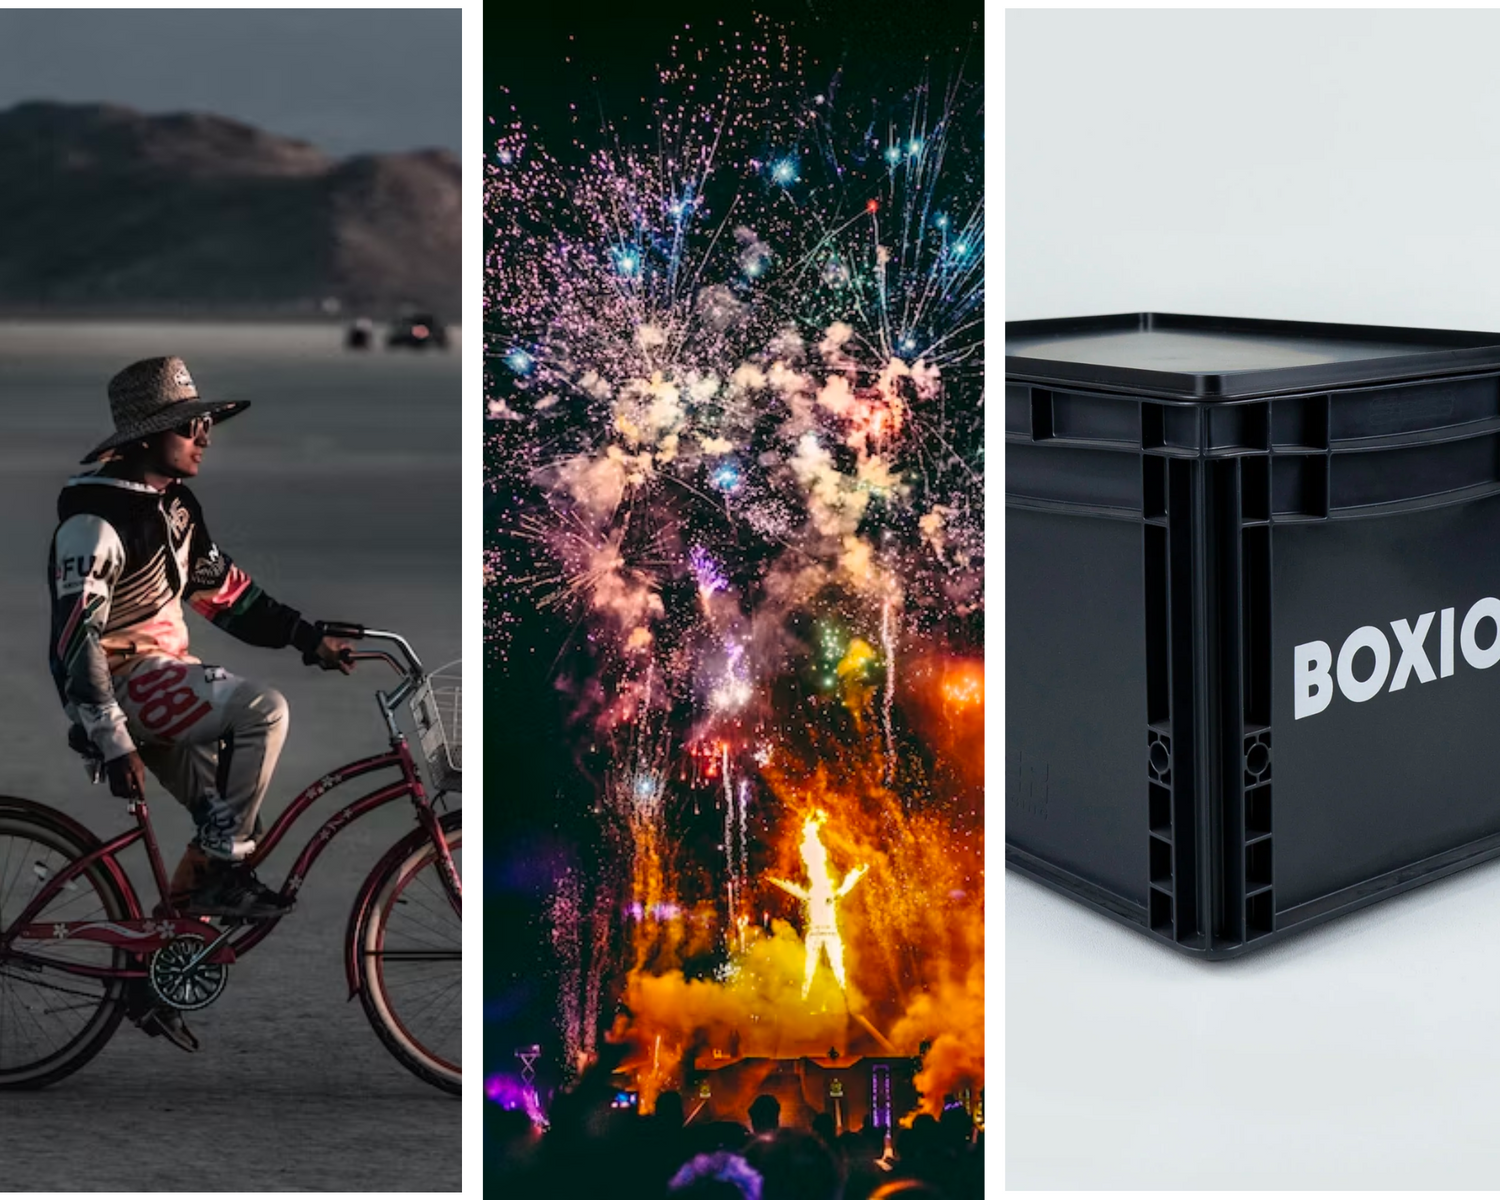 Creating the Ultimate Burning Man Campsite with Boxio's Lightweight and Stackable Boxes